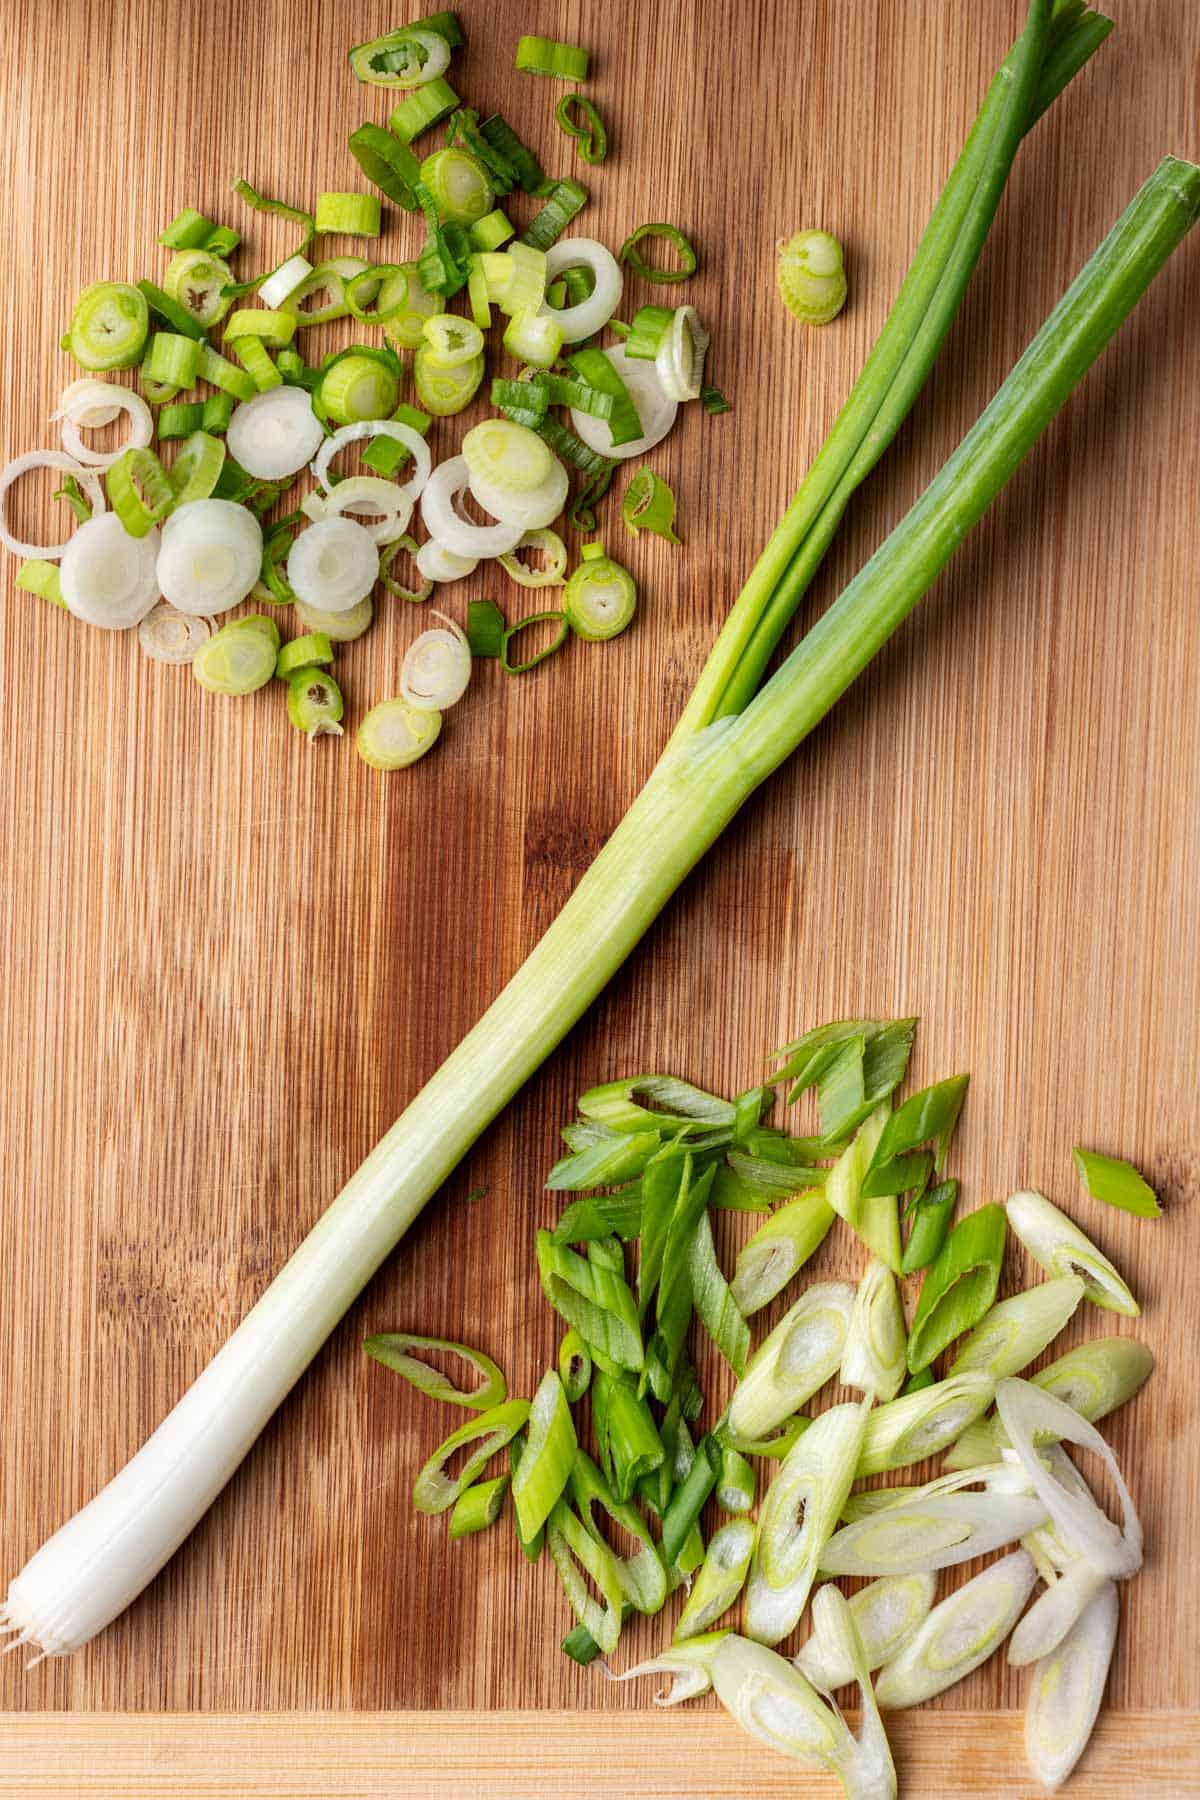 A whole green onion, sliced green onion, and green onion cut on a bias.